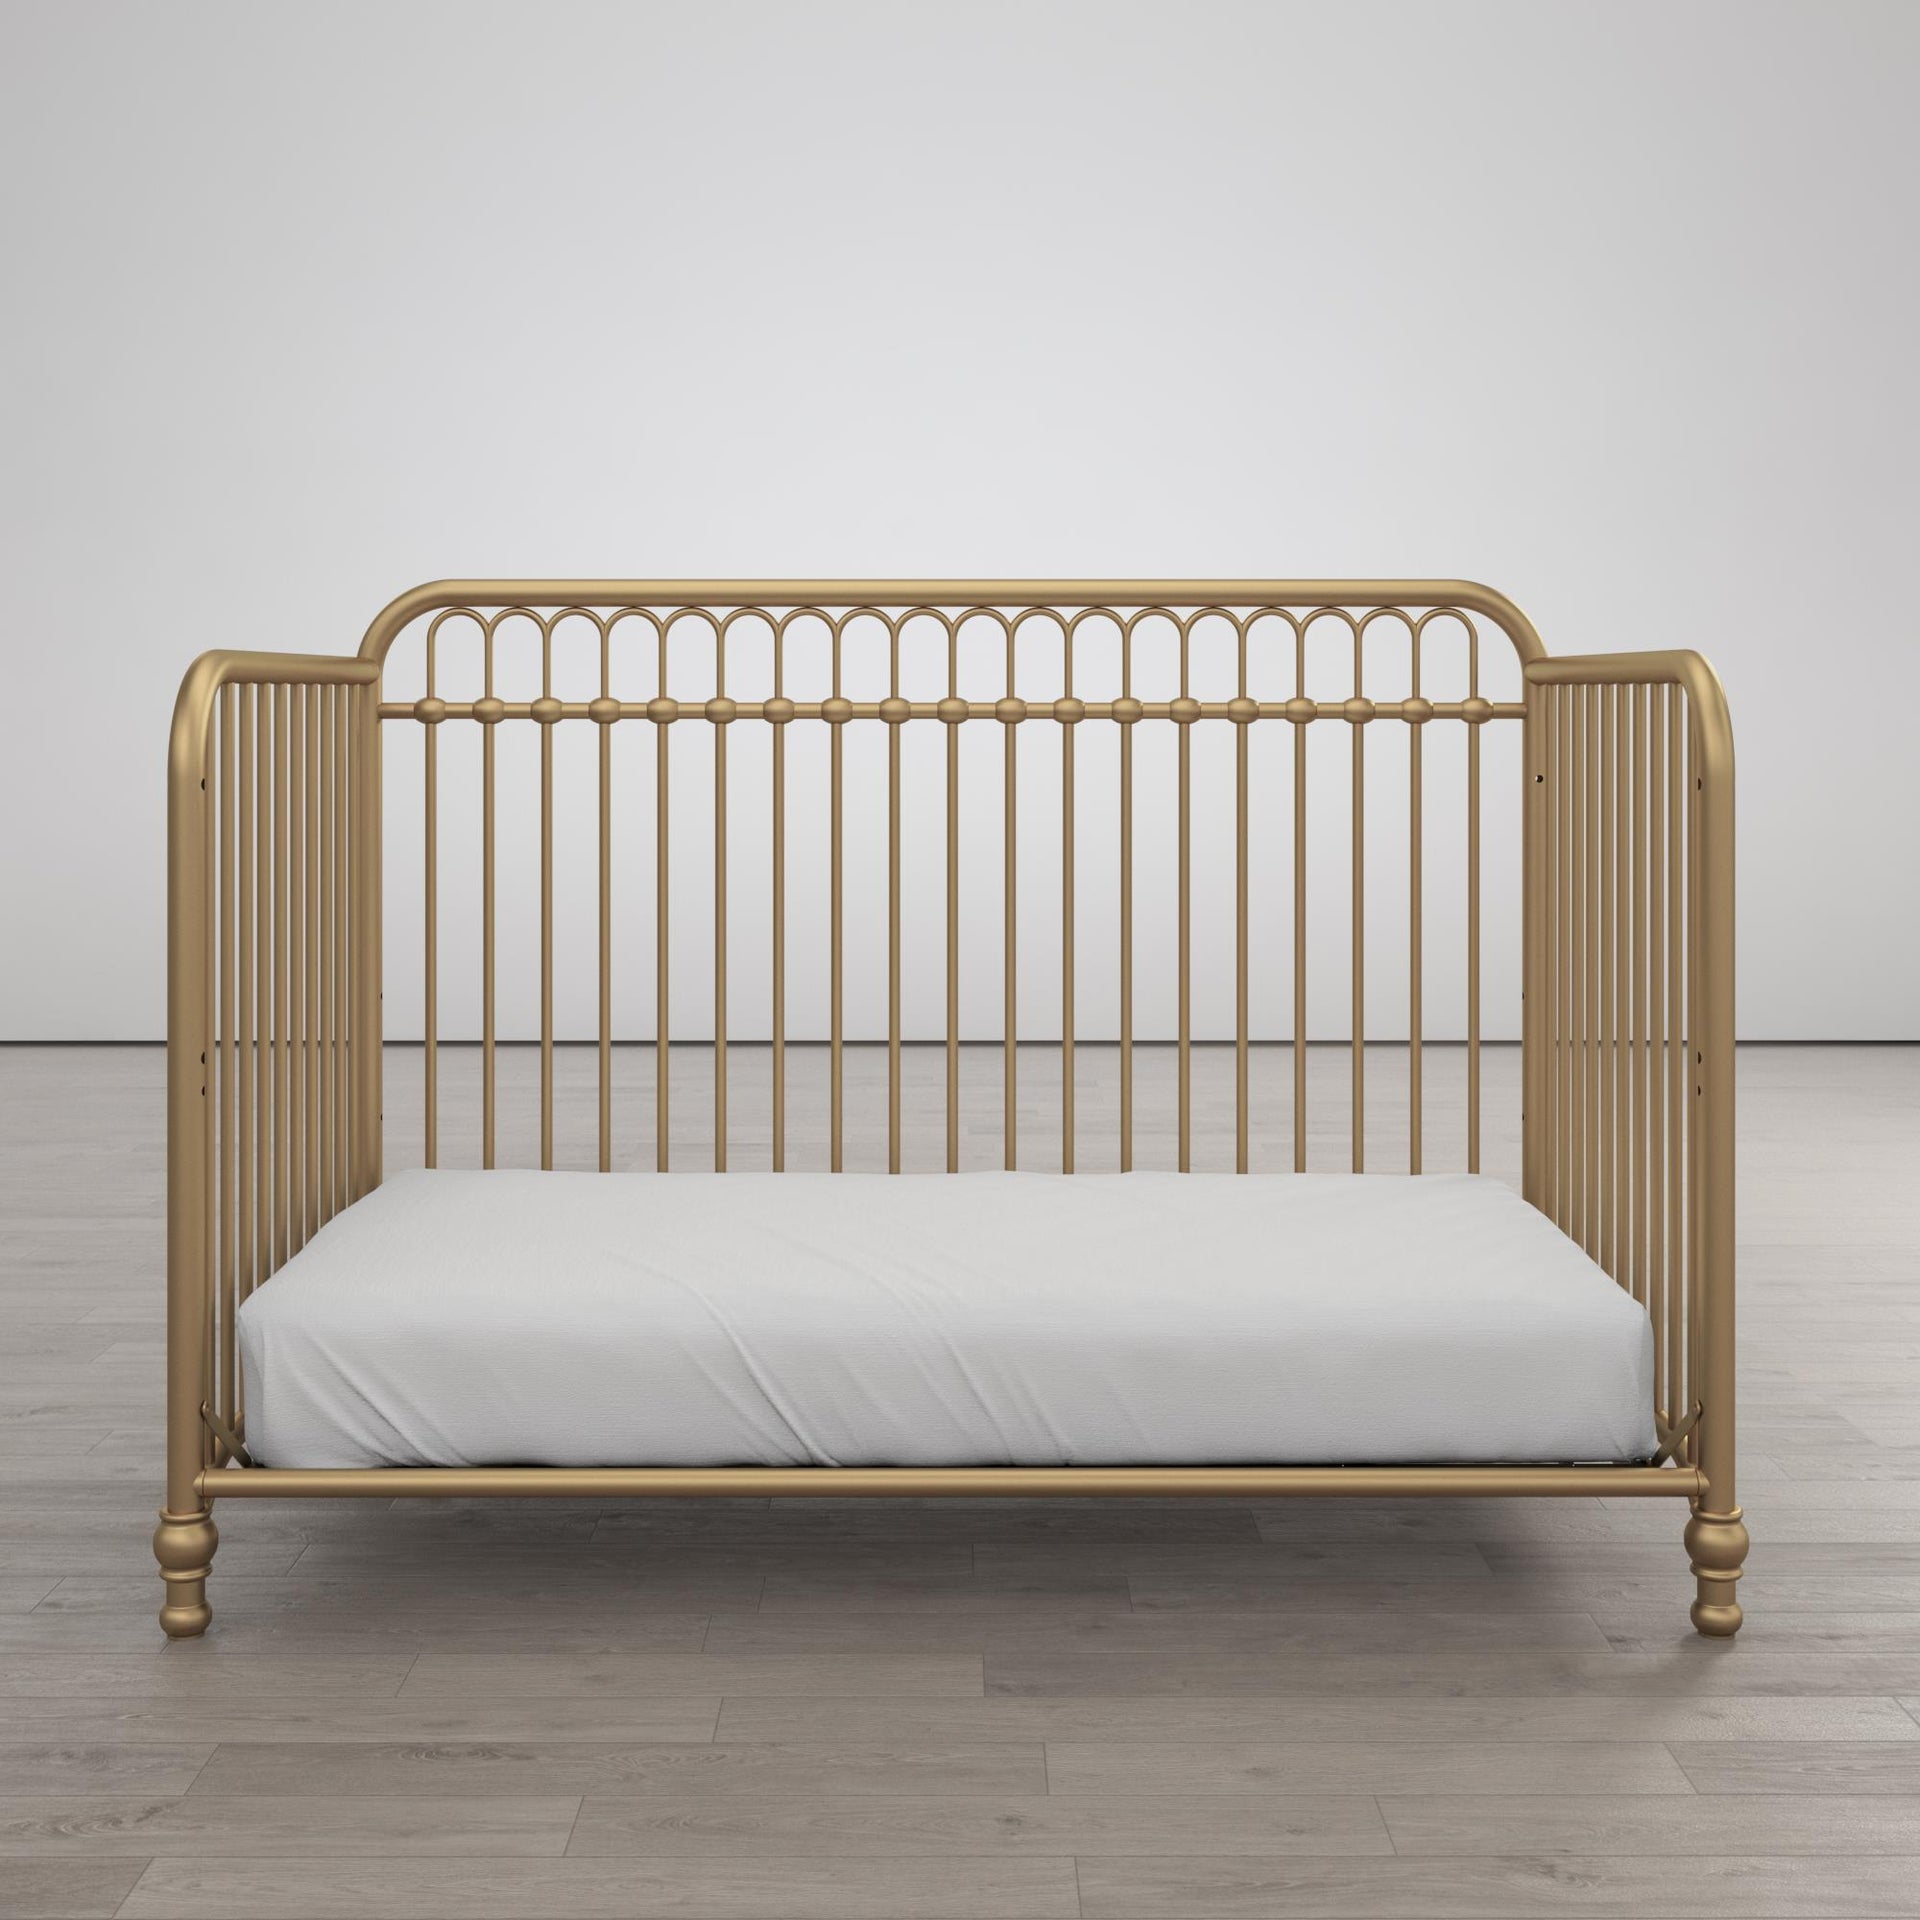 Little Seeds Raven 3-in-1 Metal Crib - Gold